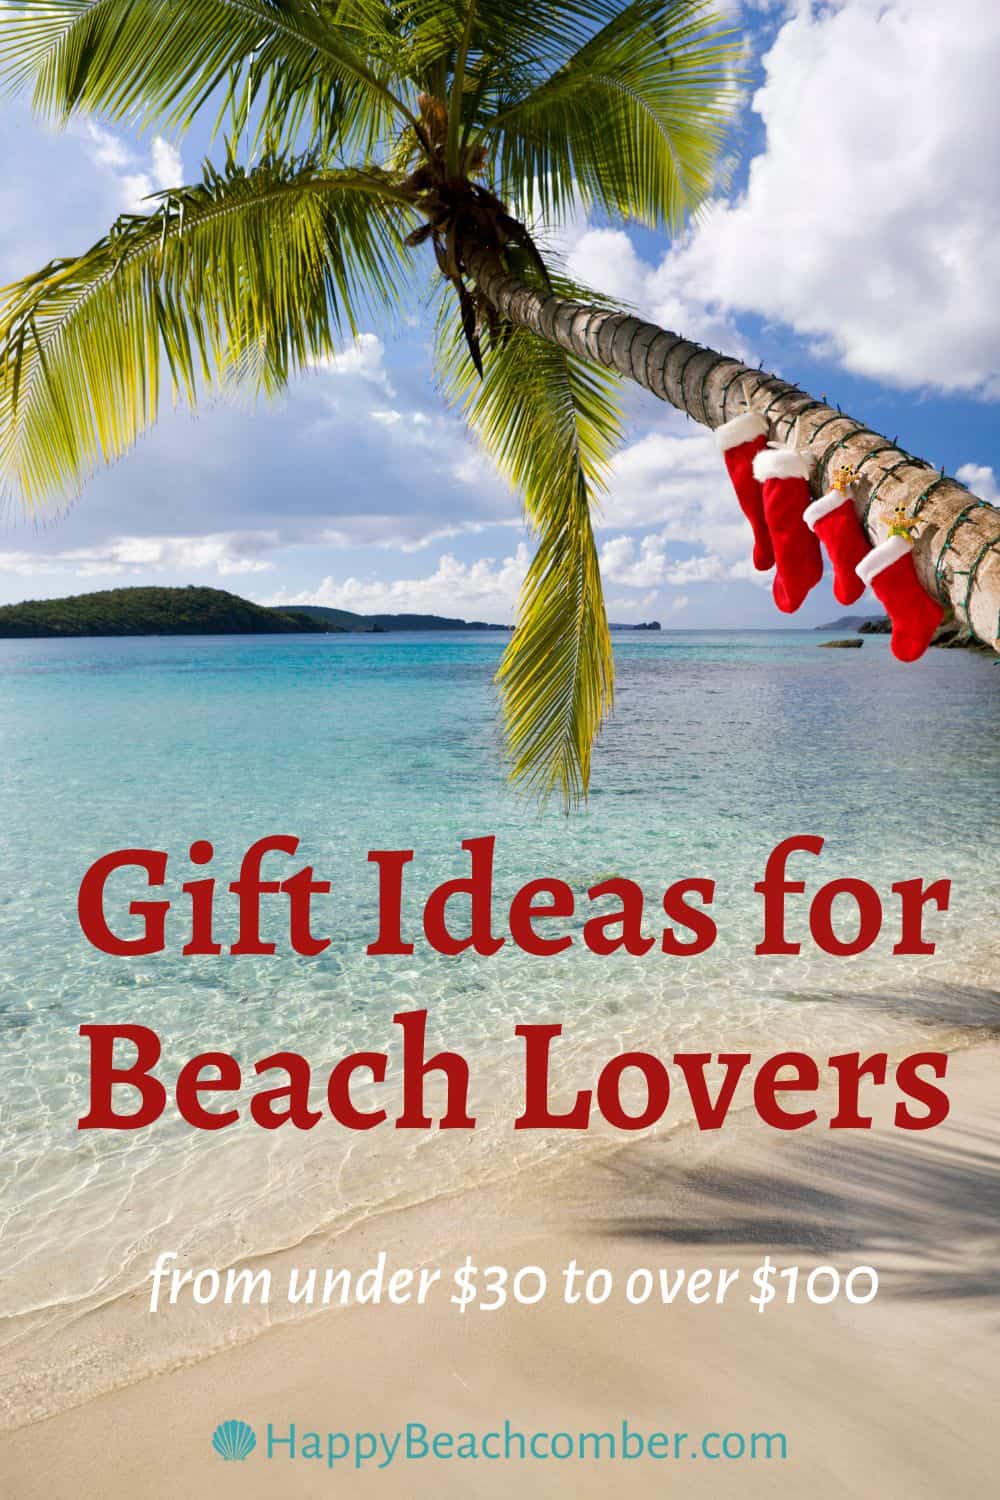 Gift Ideas for Beach Lovers